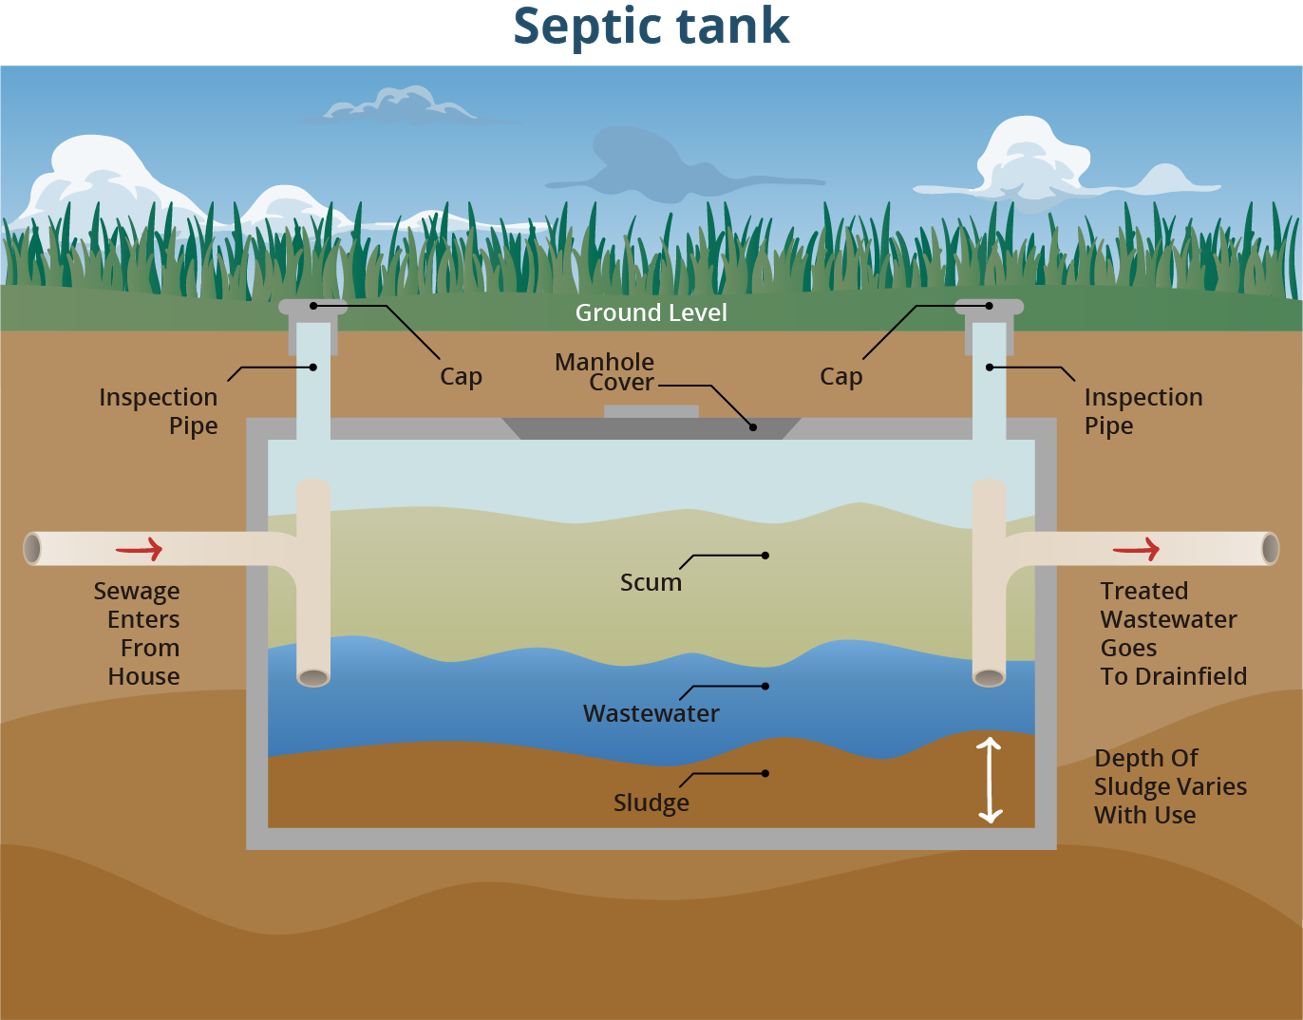 Maintaining your septic system: Should you use additives?